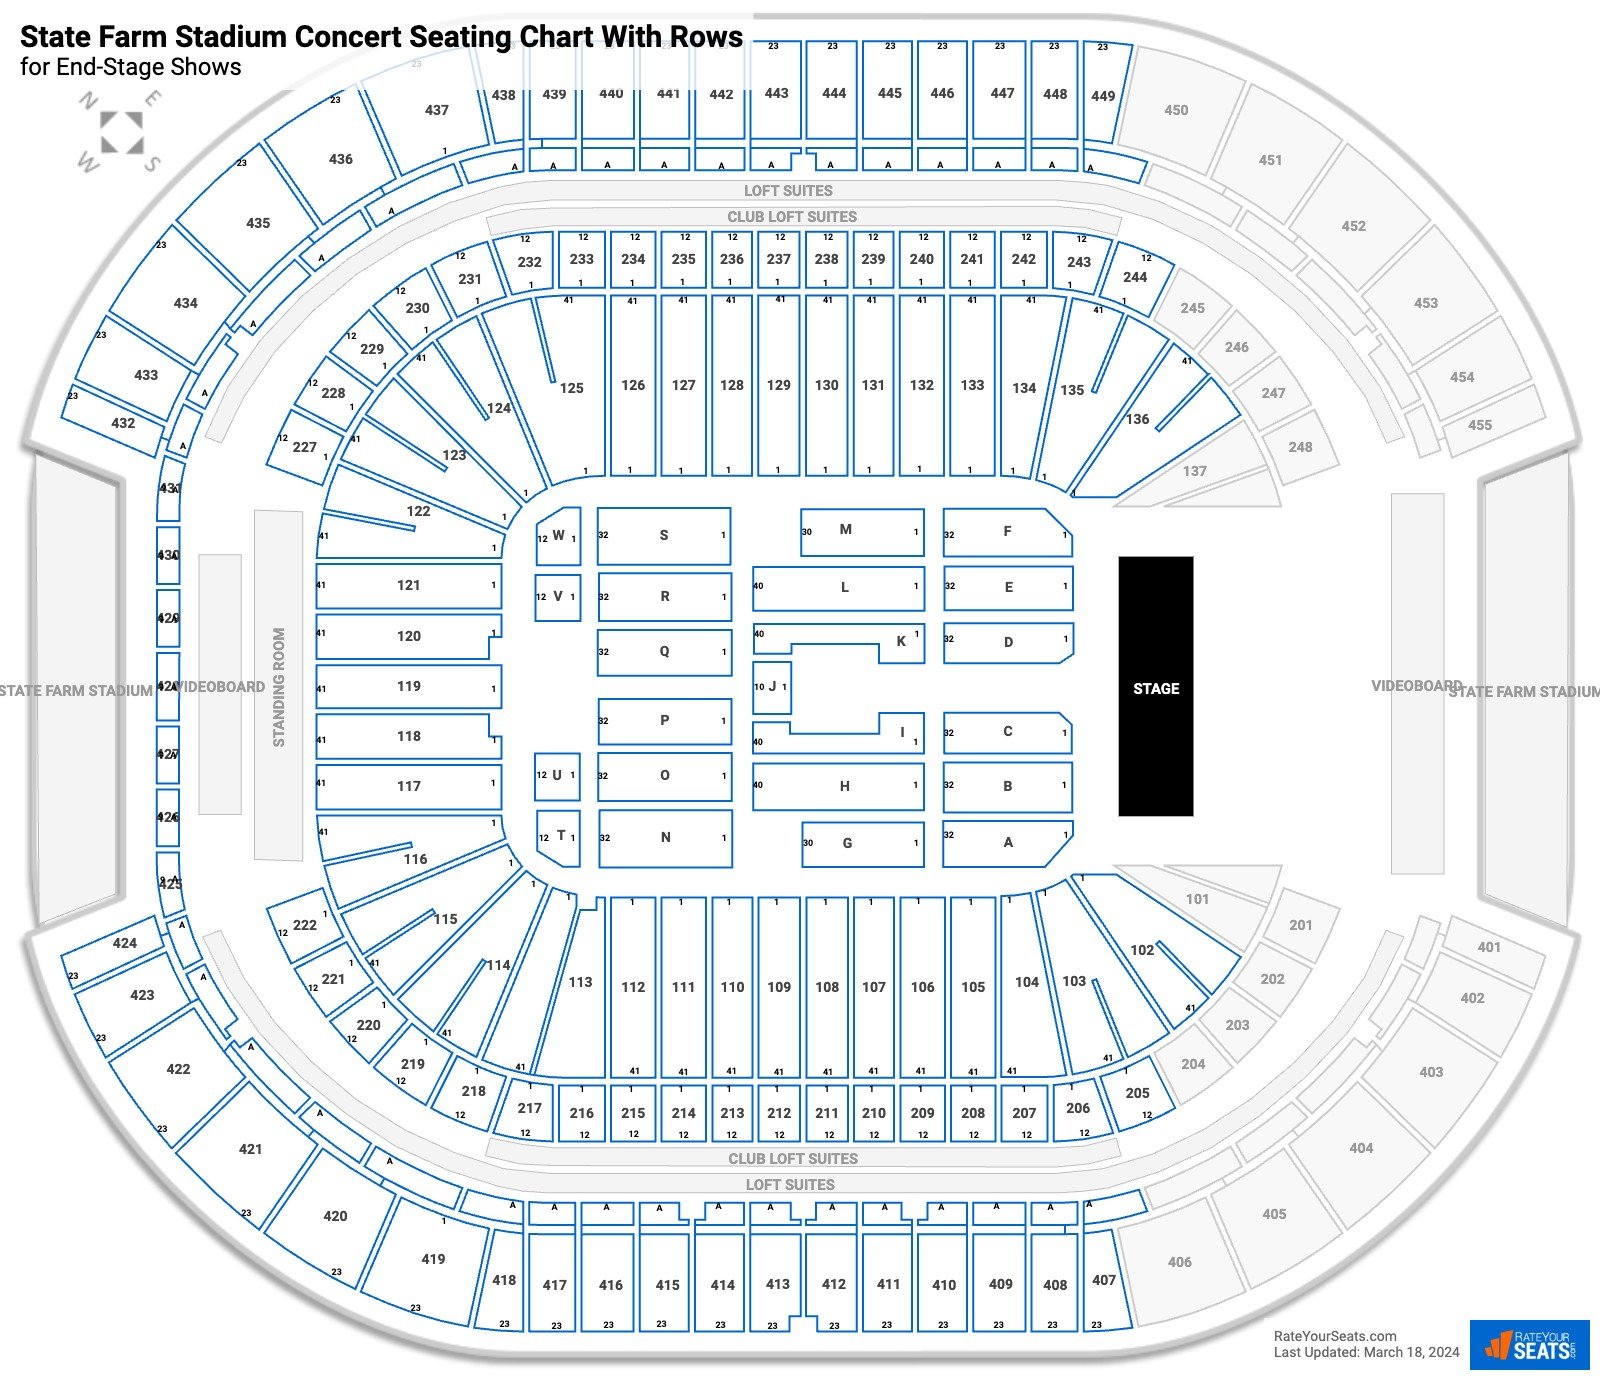 State Farm Stadium Seating Charts for Concerts - RateYourSeats.com